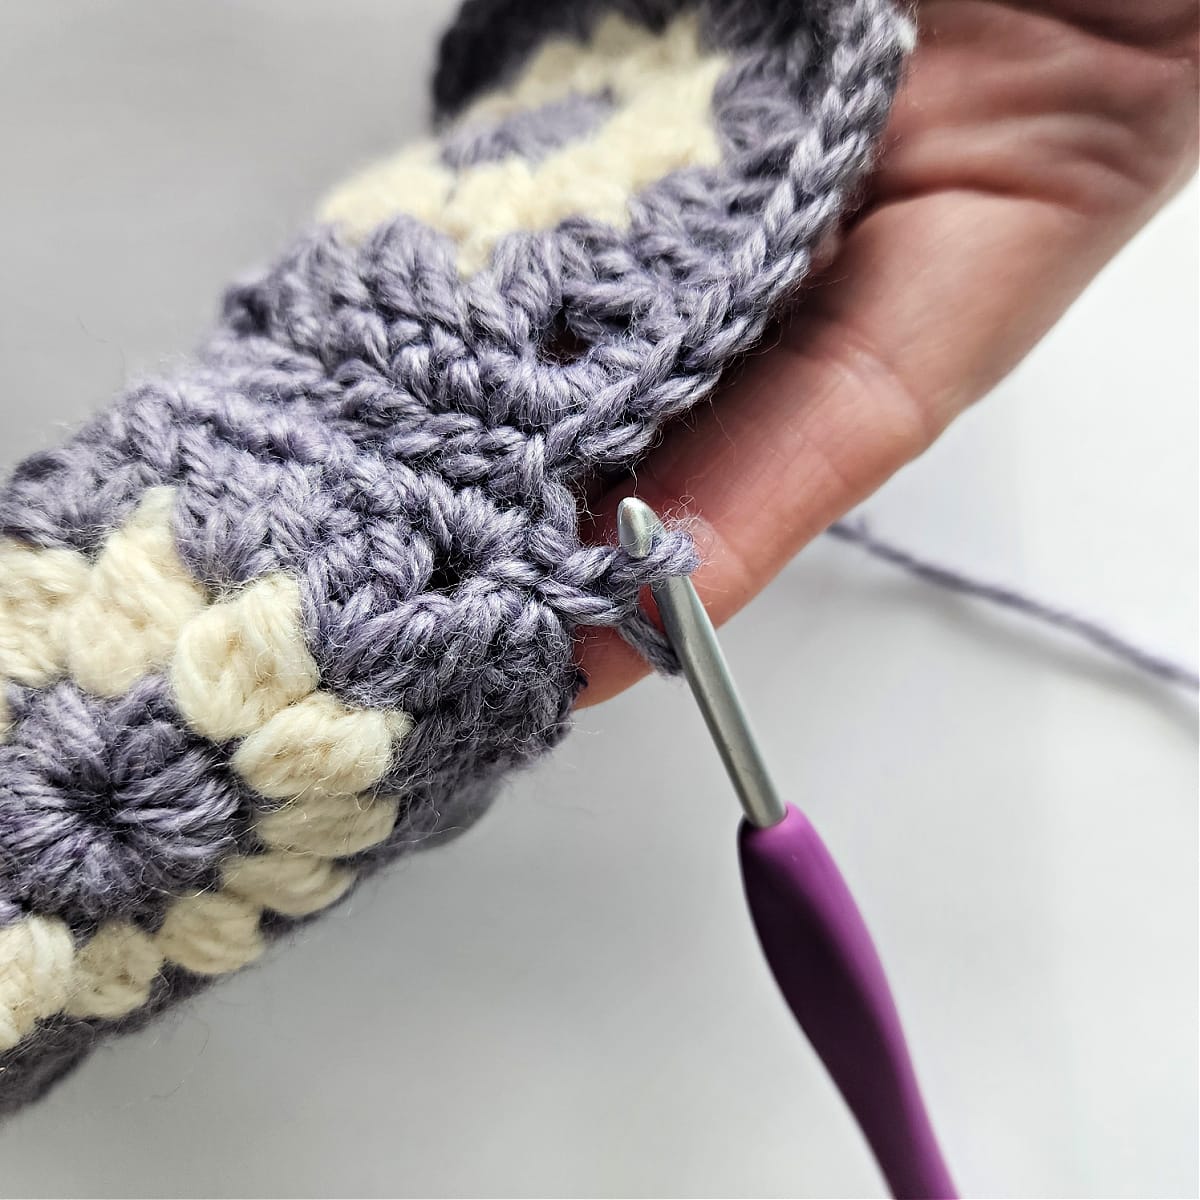 Join yarn with a slip stitch near top of eye glasses case.